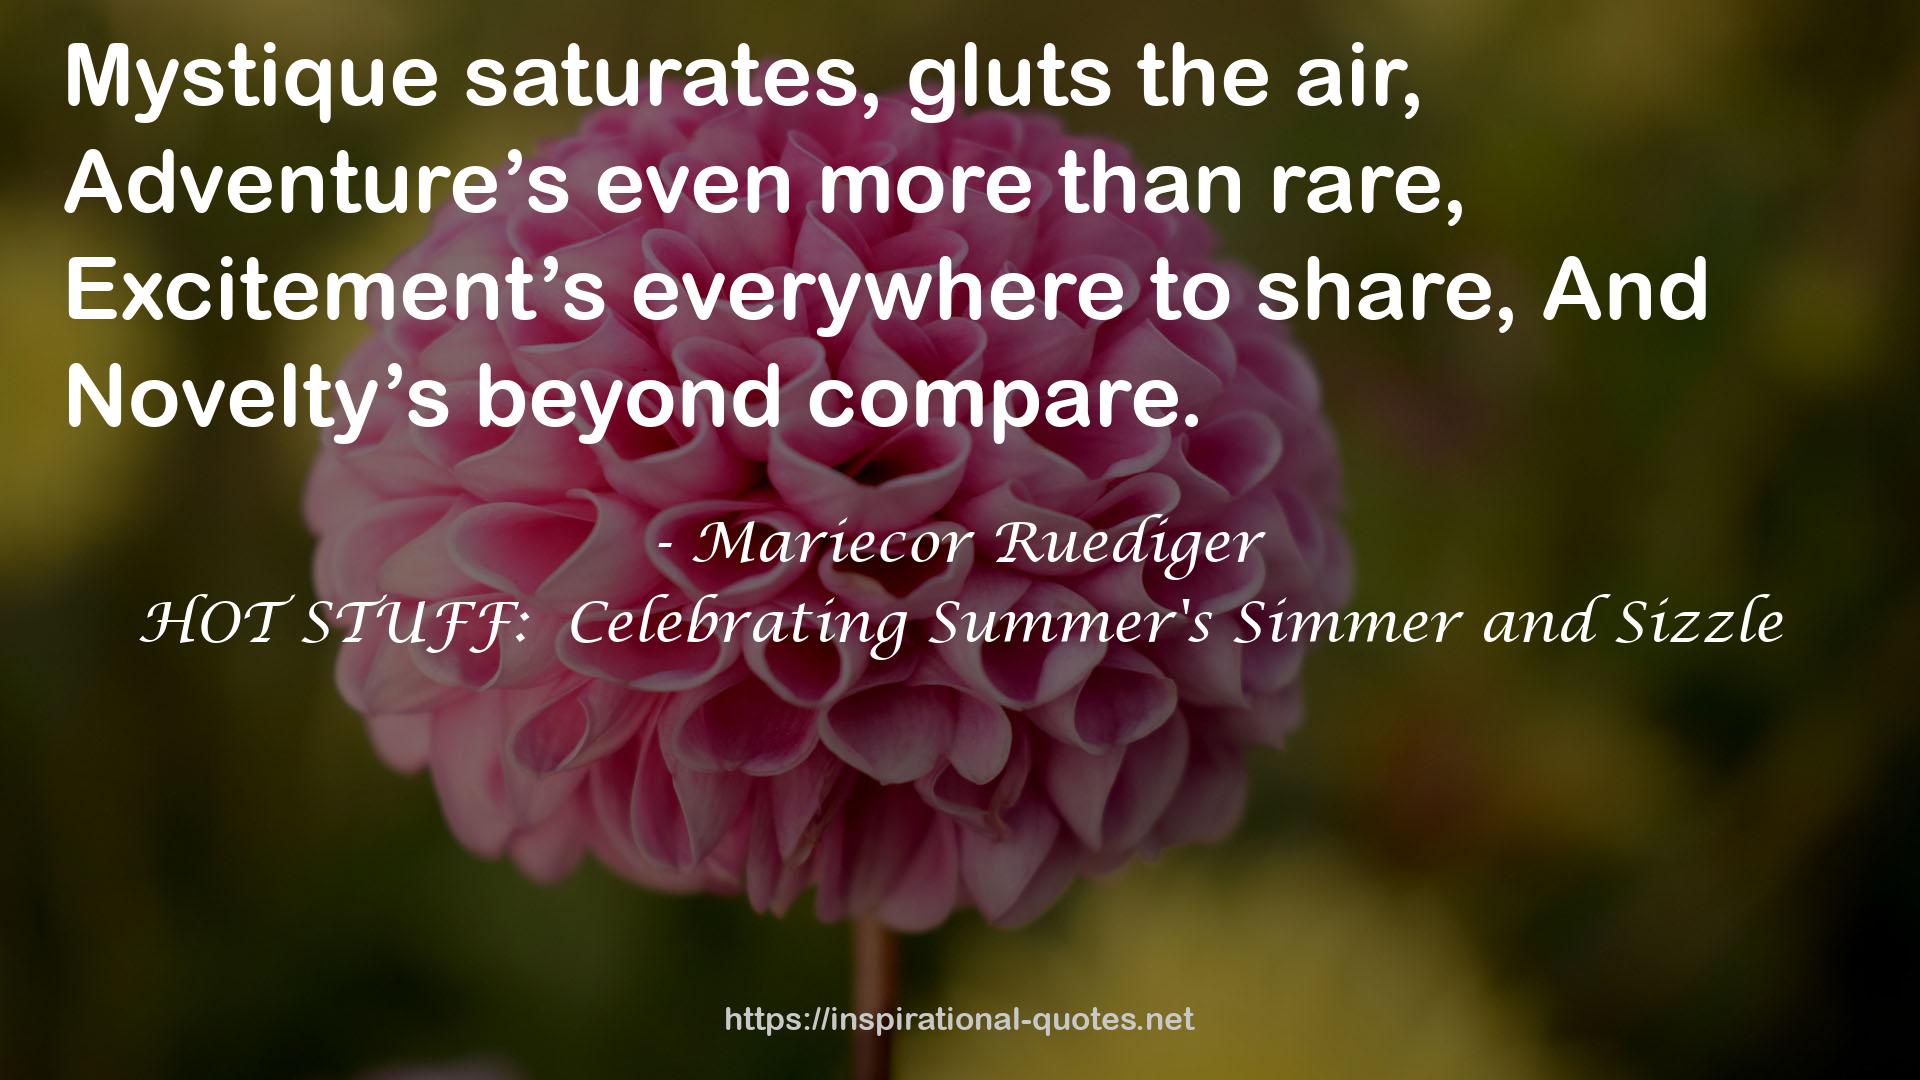 HOT STUFF:  Celebrating Summer's Simmer and Sizzle QUOTES